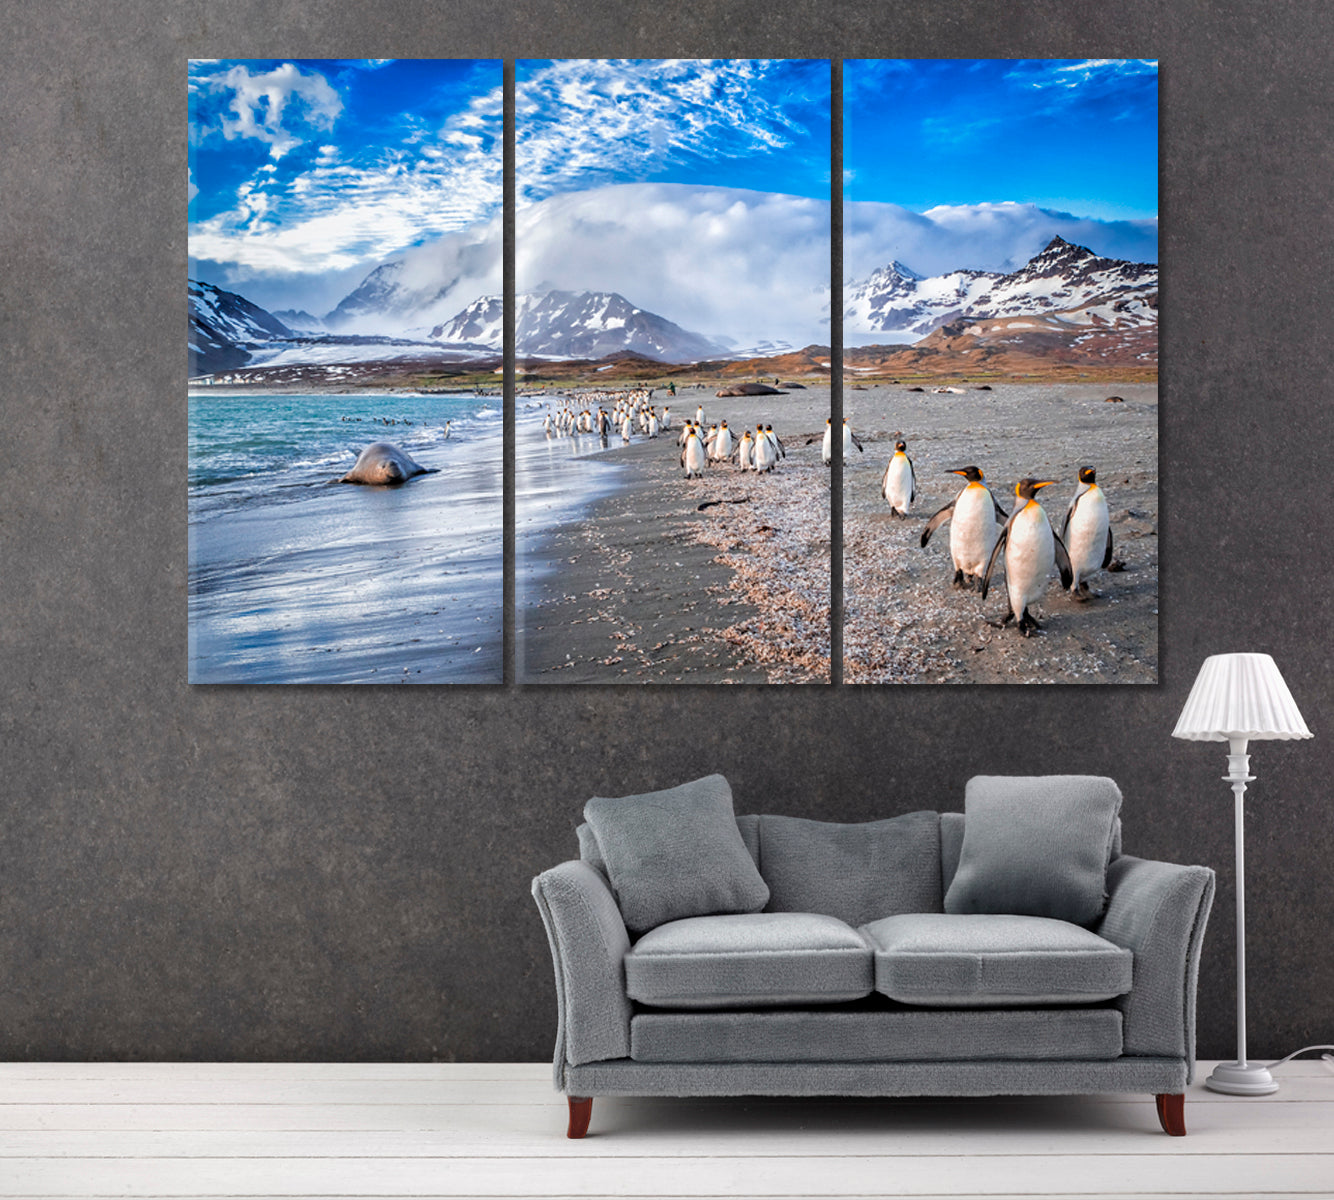 King Penguins St. Andrews Bay South Georgia Canvas Print ArtLexy 5 Panels 36"x24" inches 